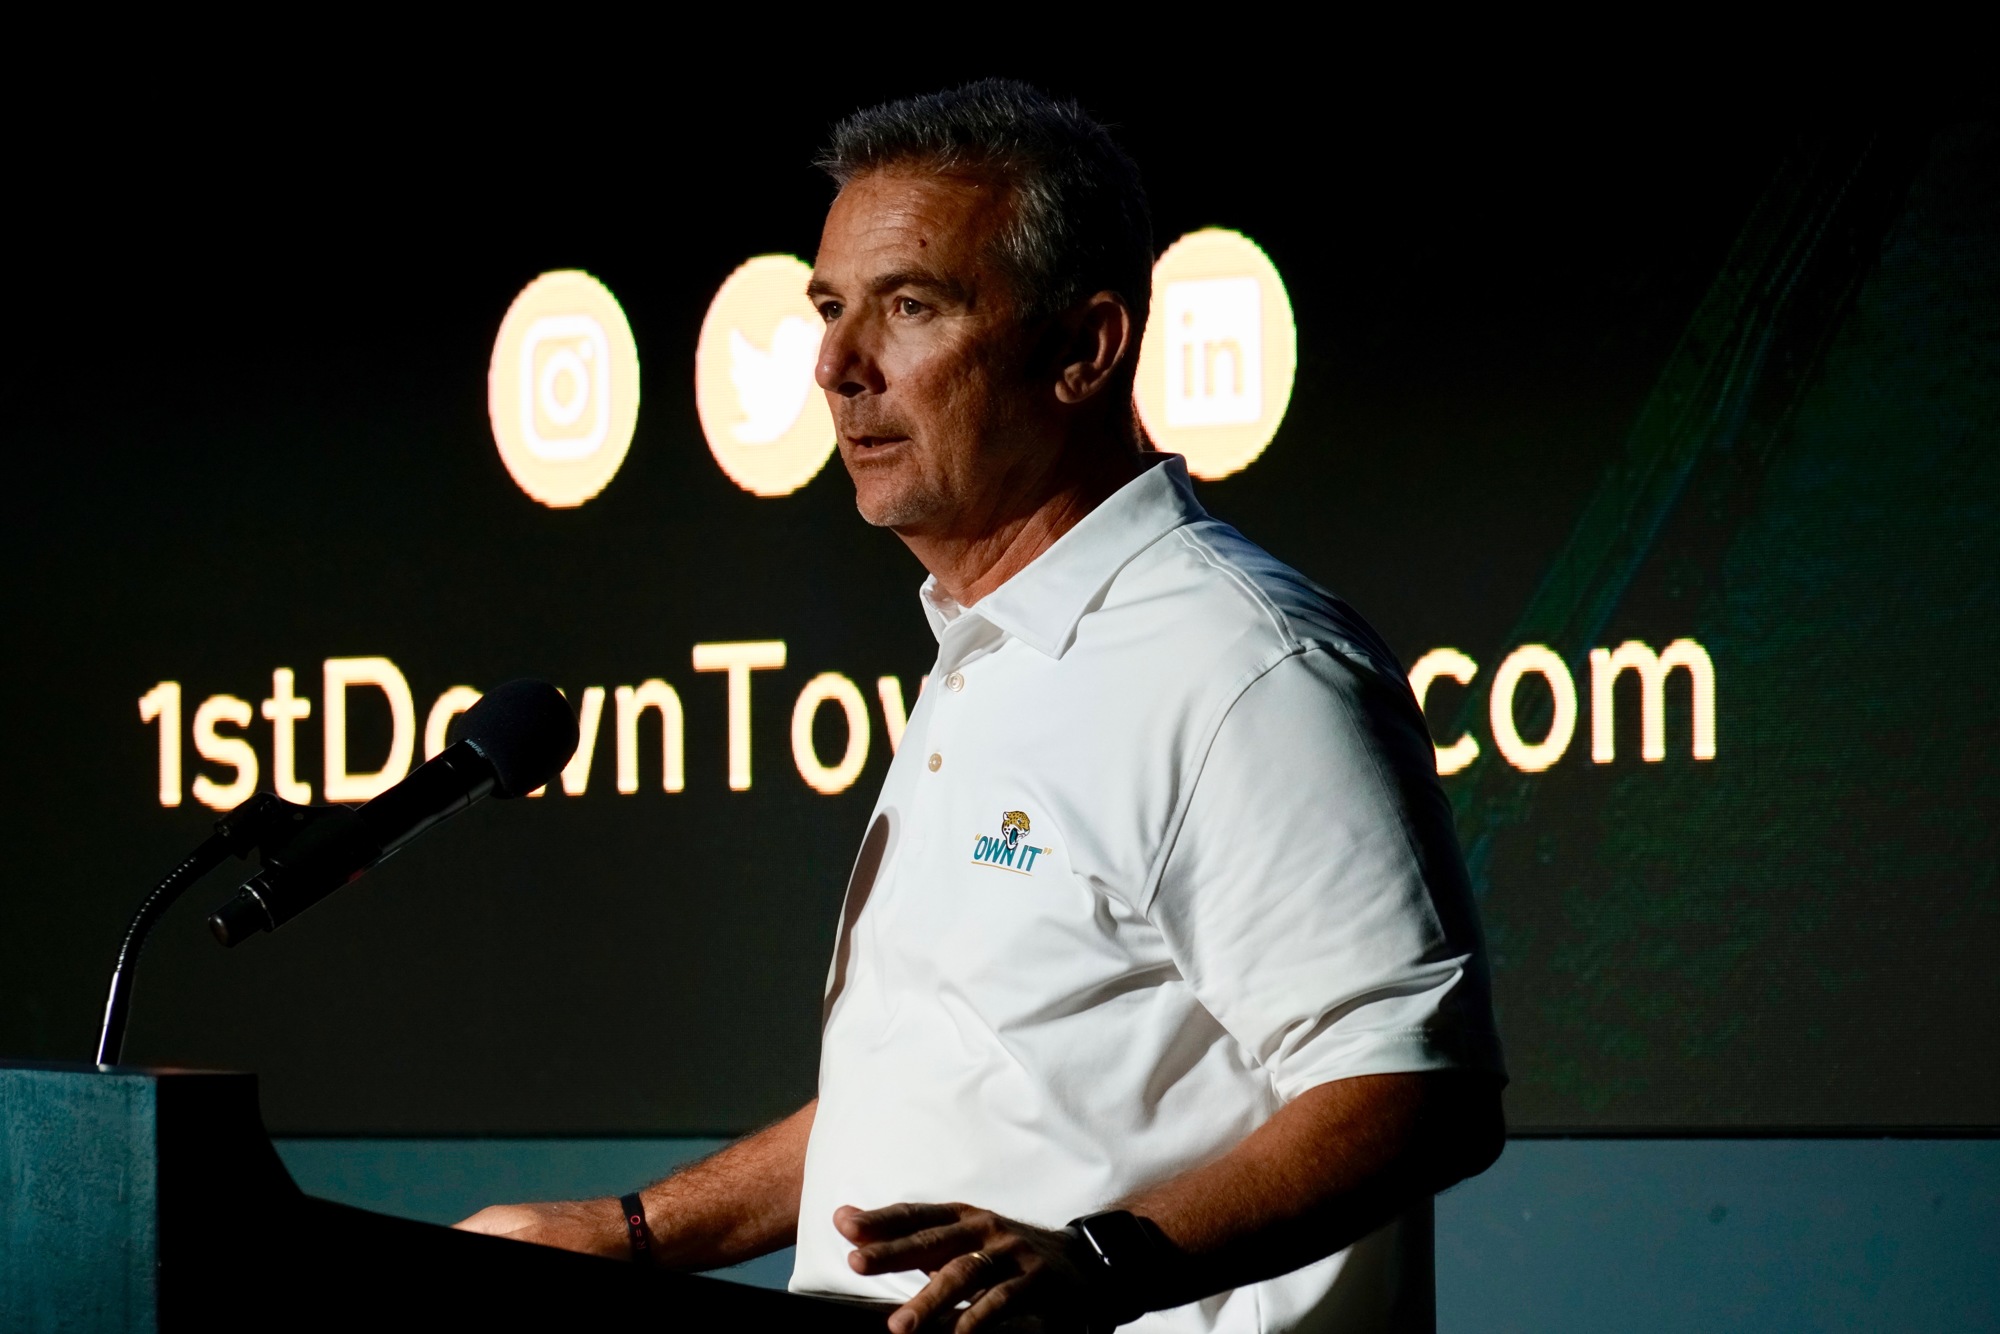 Jaguars head coach Urban Meyer said he wants Jacksonville to be a destination for athletes to train.